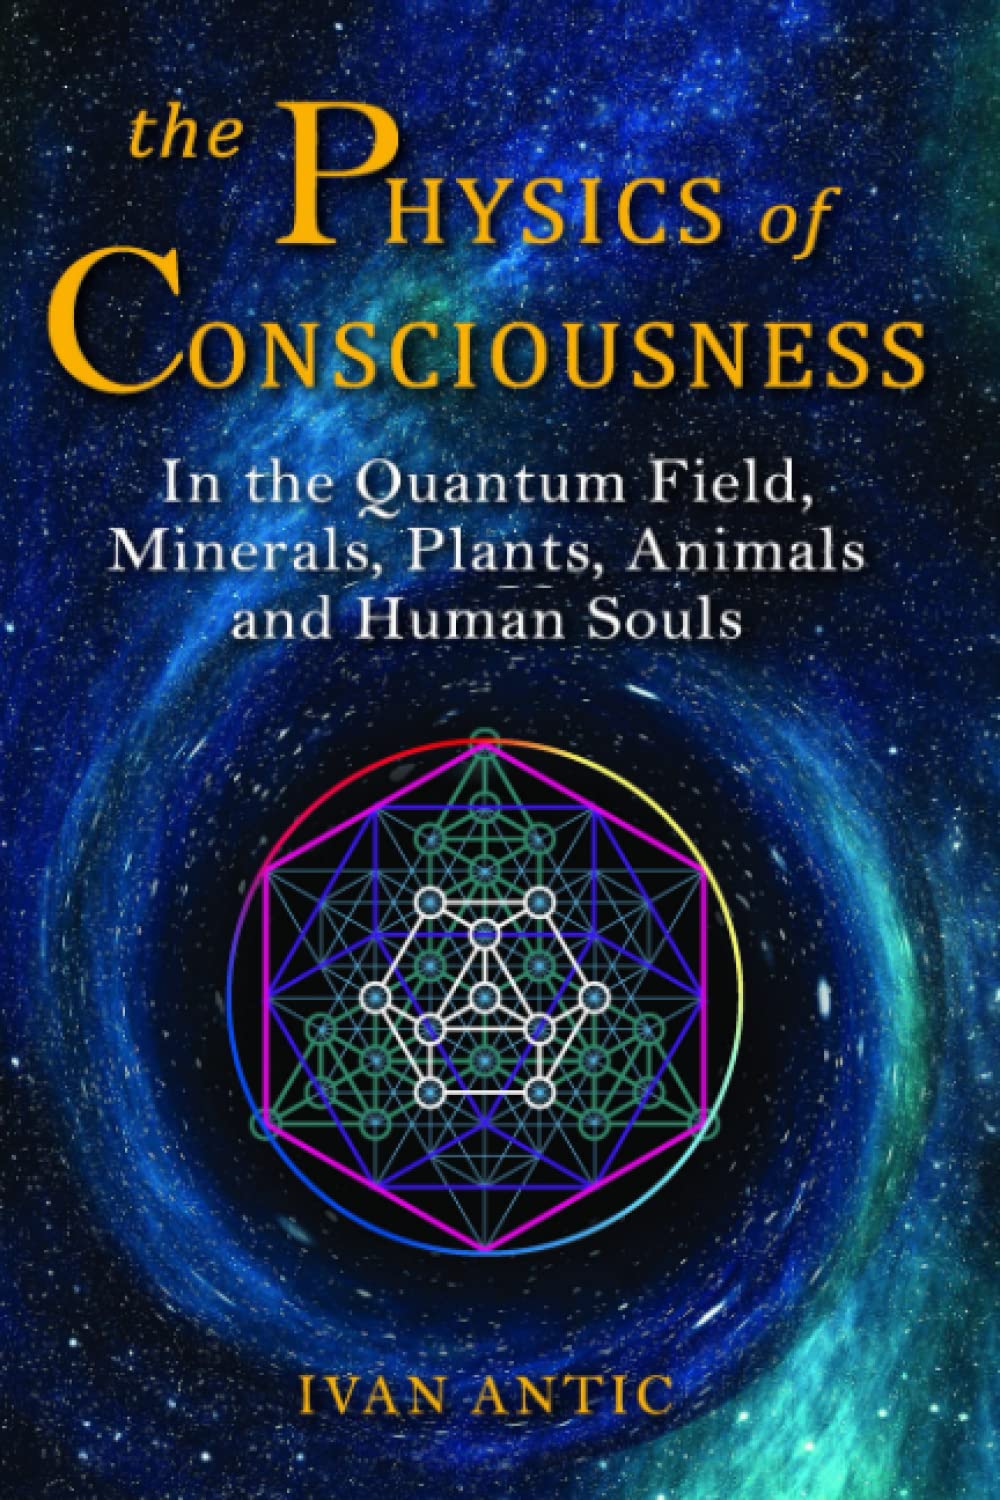 The Physics of Consciousness: In the Quantum Field, Minerals, Plants, Animals and Human Souls (Existence - Consciousness - Bliss) (Paperback)